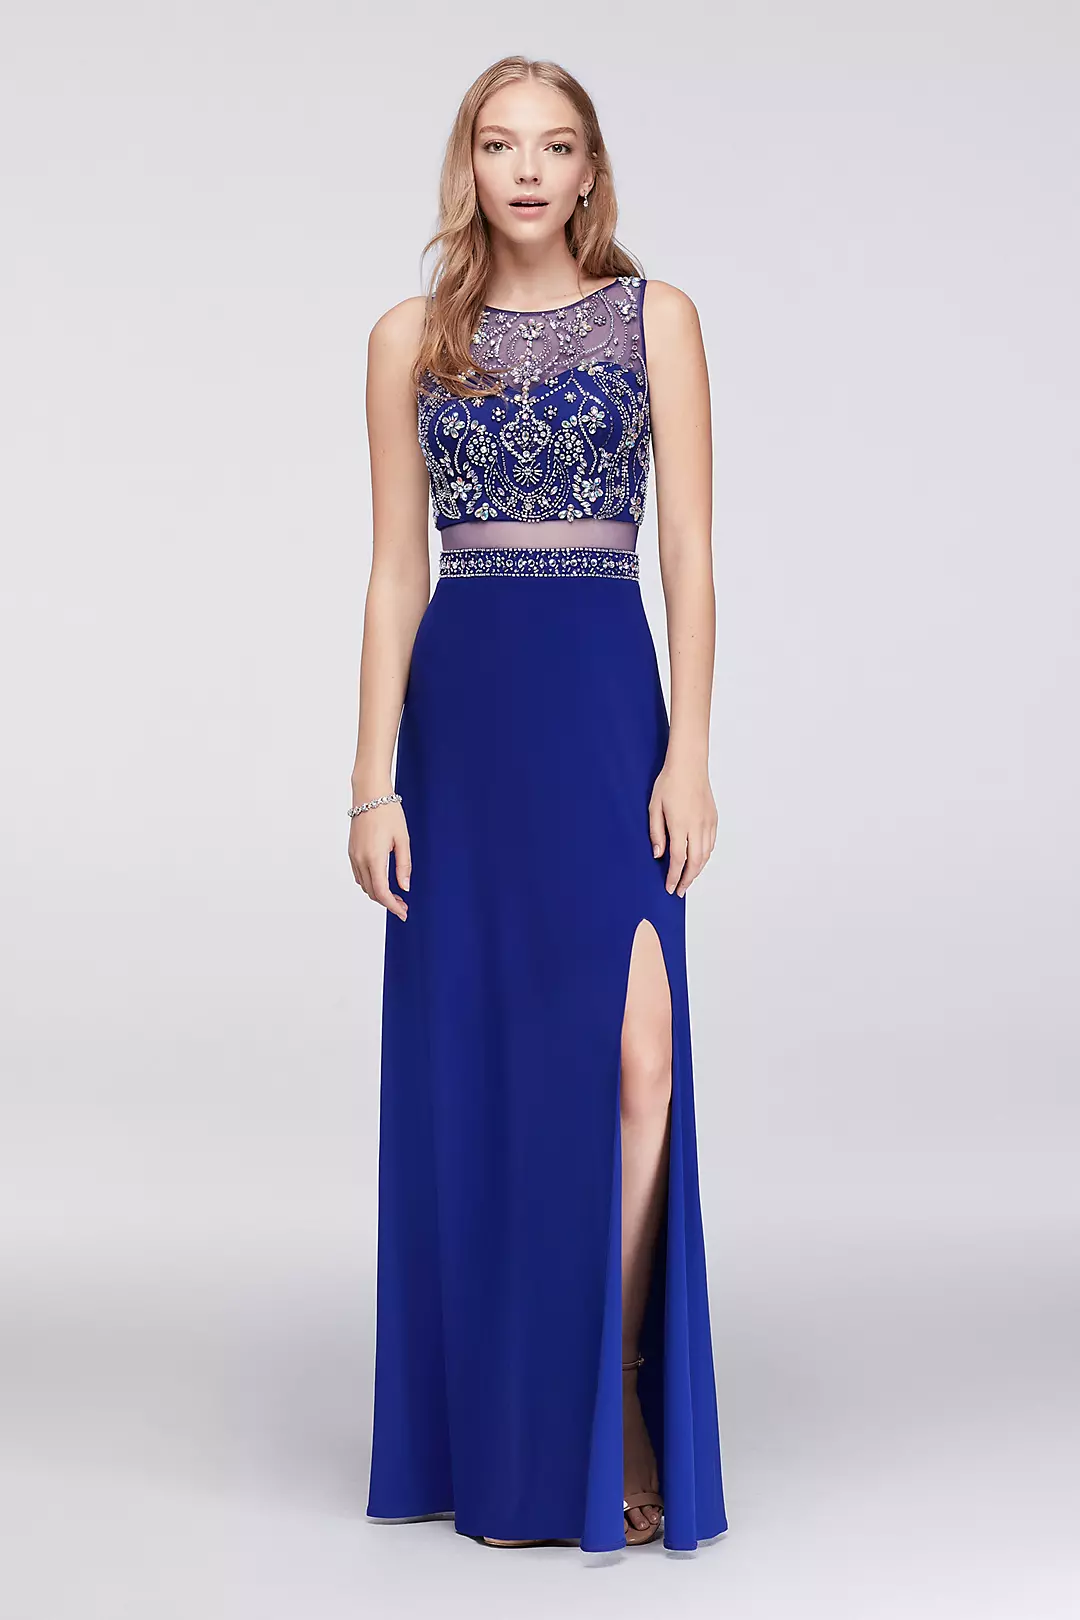 Beaded Faux Two-Piece Dress with Illusion Back Image